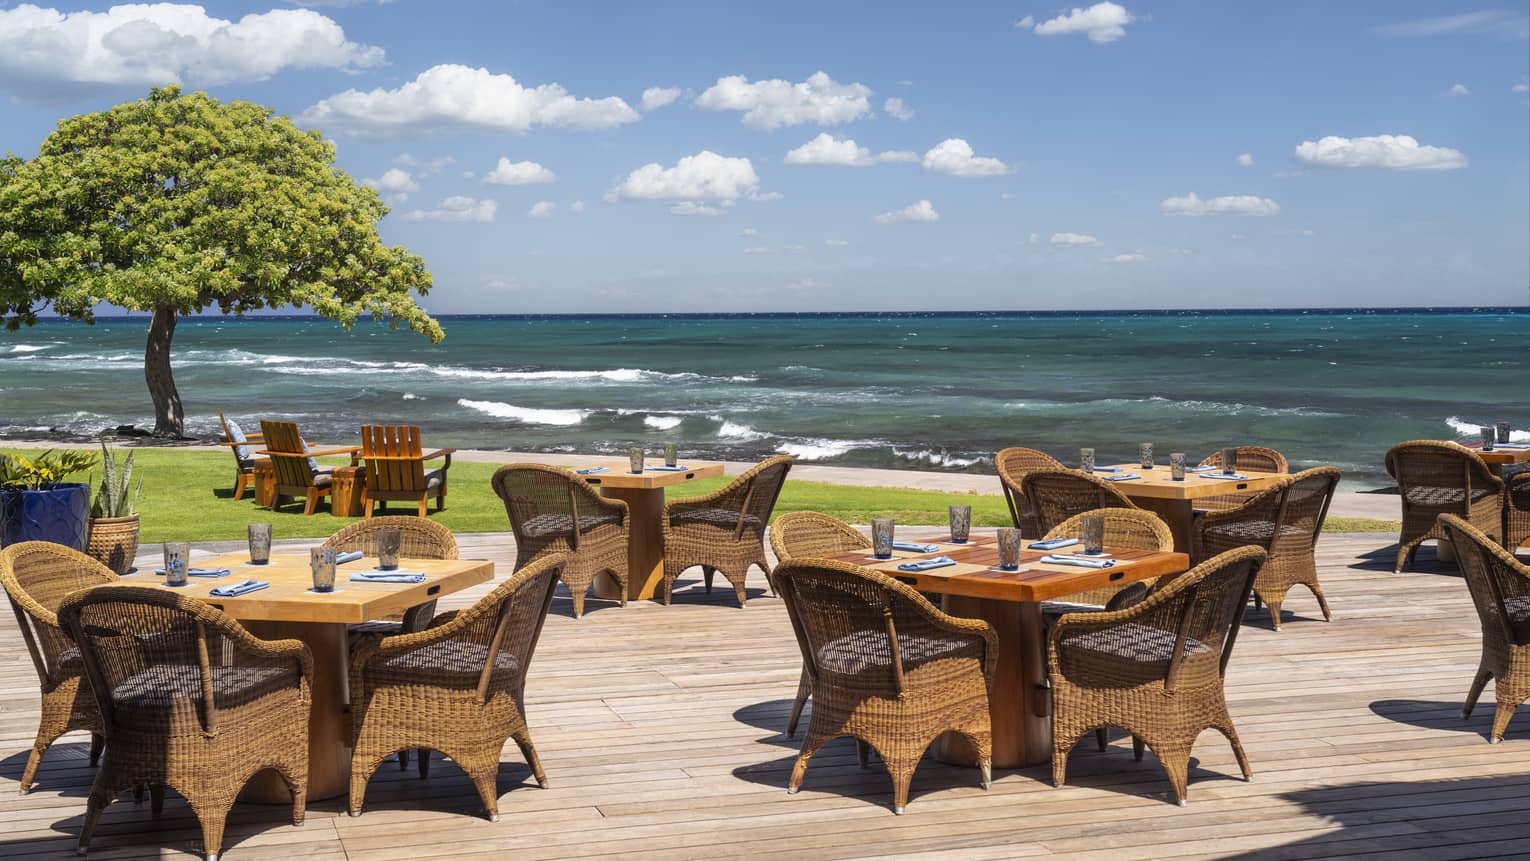 Restaurant wooden terrace with tables next to the ocean